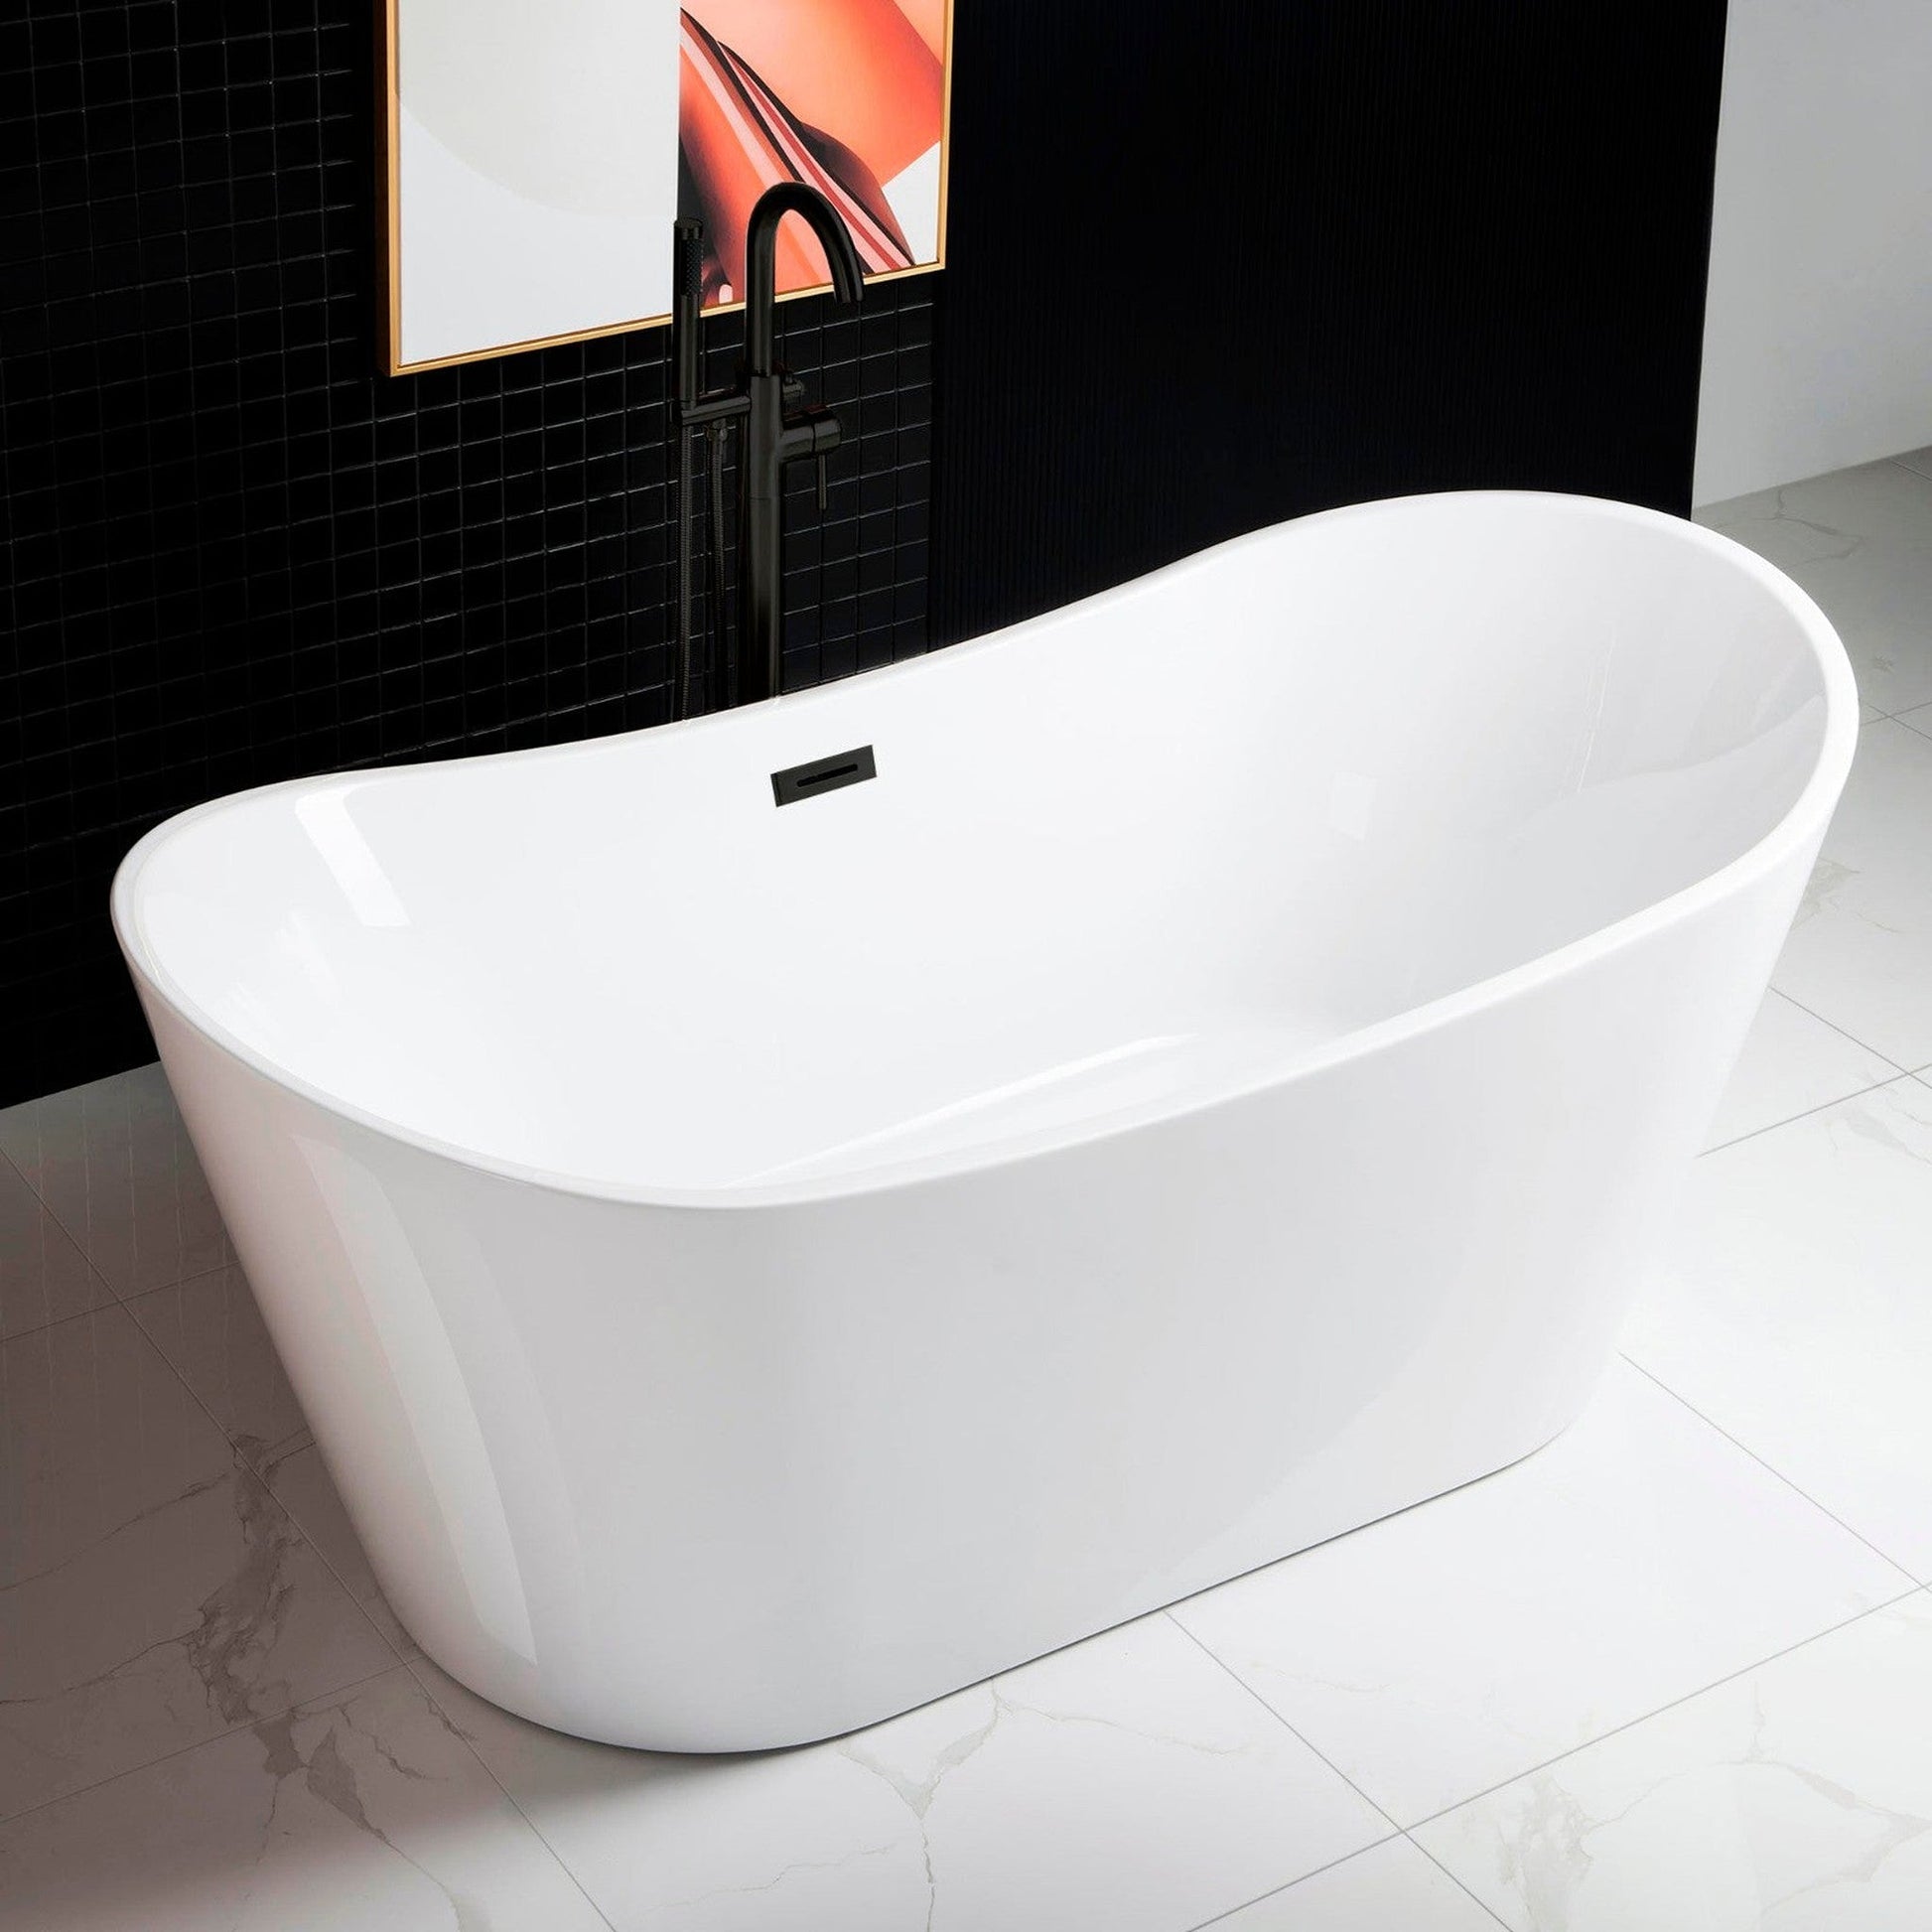 WoodBridge B0010 67" White Acrylic Freestanding Contemporary Soaking Bathtub With Matte Black Drain, Overflow, F0006MBSQ Tub Filler and Caddy Tray